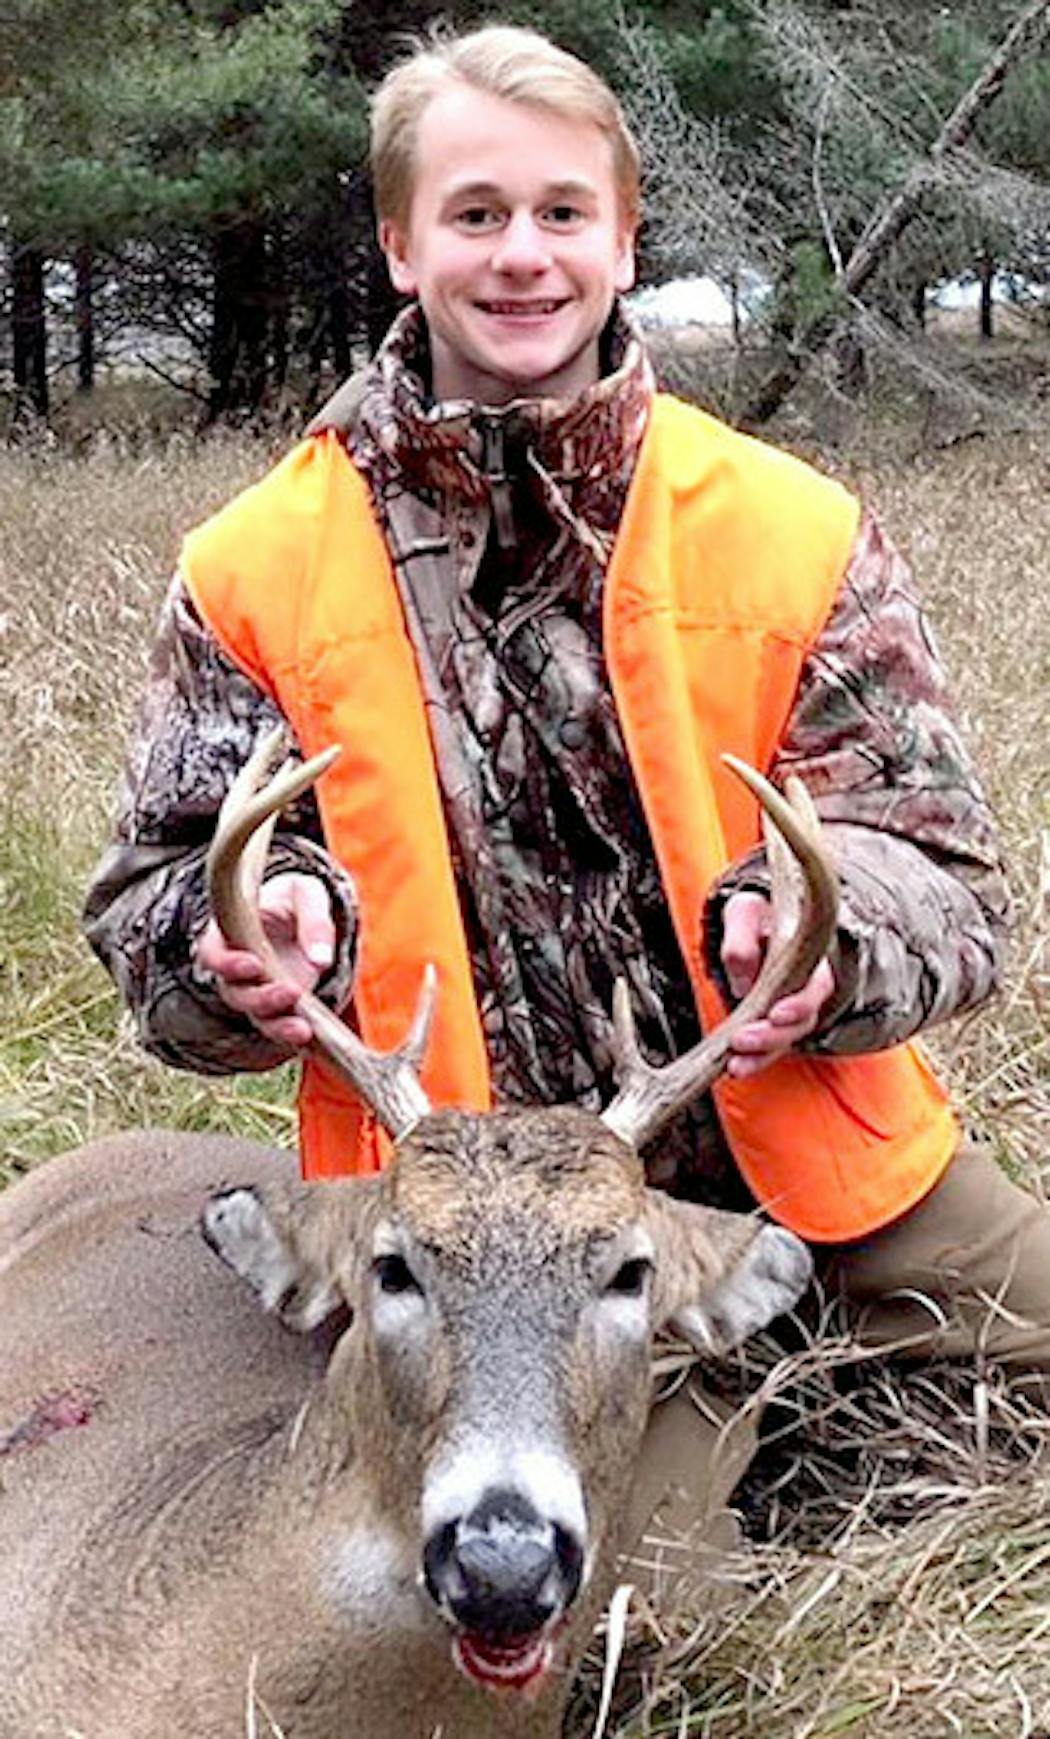 This buck was moving through the pine trees near Rose City, Minn., when Lance Zemke, 14, of Baxter, Minn., took aim with a 12-gauge shotgun. It was the second buck harvested by Lance in his brief hunting career.